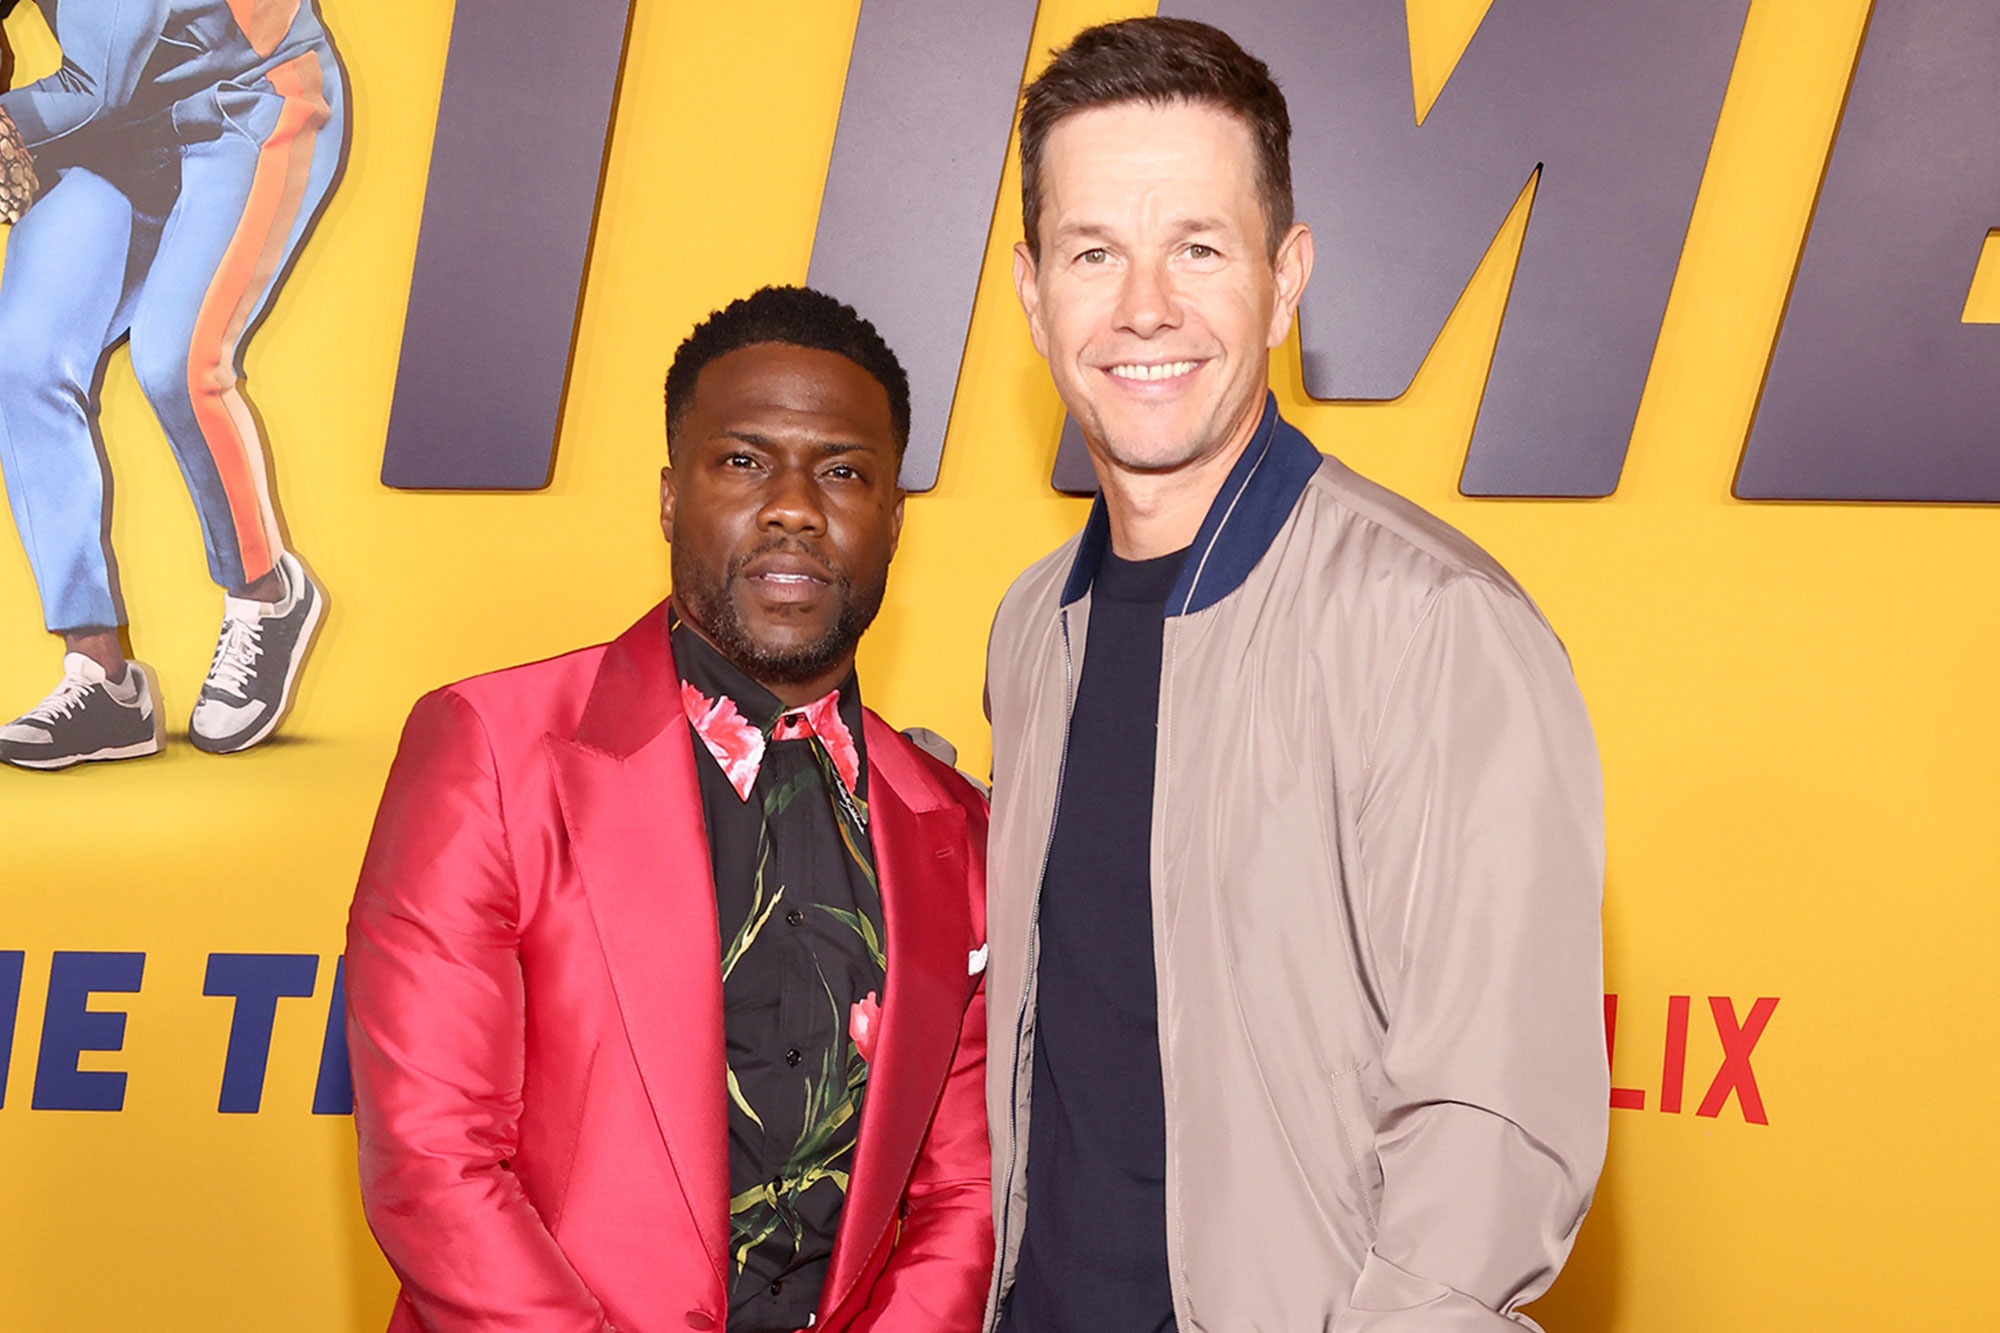 Kevin Hart and Mark Wahlberg attend the Netflix premiere of "Me Time" in Los Angeles on Aug. 23.